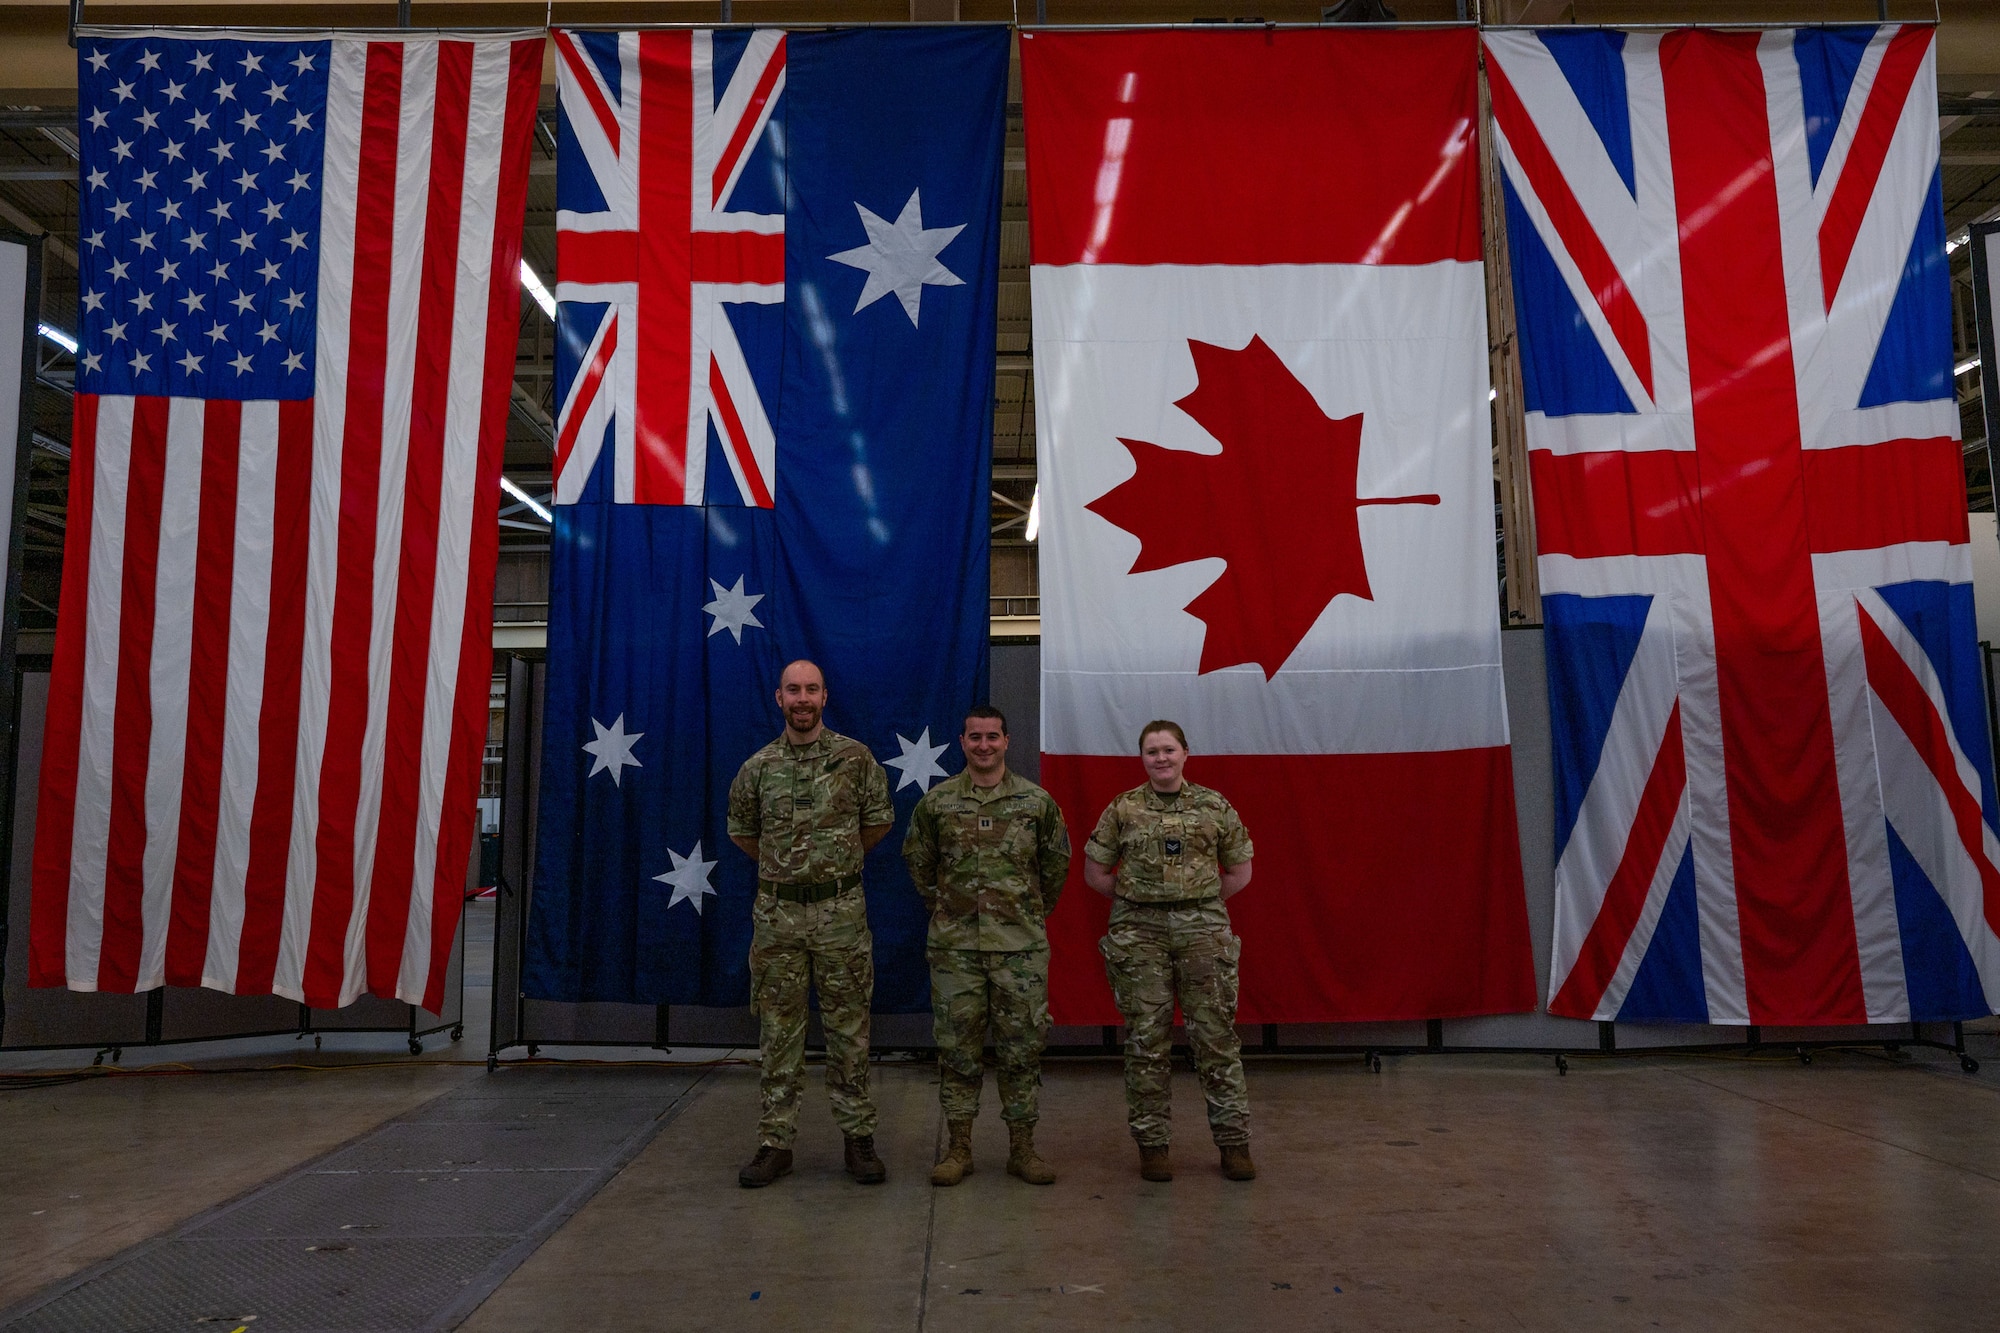 (From left to right) Royal Air Force (RAF) Flying Officer Hallchurch, U.K. Space Operations Centre (UKSpOC) space duty officer, U.S. Space Force Capt. Dustin Pessatore, 18th Space Defense Squadron (18 SDS) sharing coordinator, and RAF Corporal Coulson, UKSpOC space analyst, stand in front of flags in 18 SDS’s High Bay at Vandenberg Space Force Base, Calif., Feb. 13, 2023. According to U.K.’s Defence Space Strategy, the nation is focusing heavily on strengthening relations with Five Eyes intelligence partnerships and adopting an ‘international by design’ approach. (U.S. Space Force photo by Tech. Sgt. Luke Kitterman)